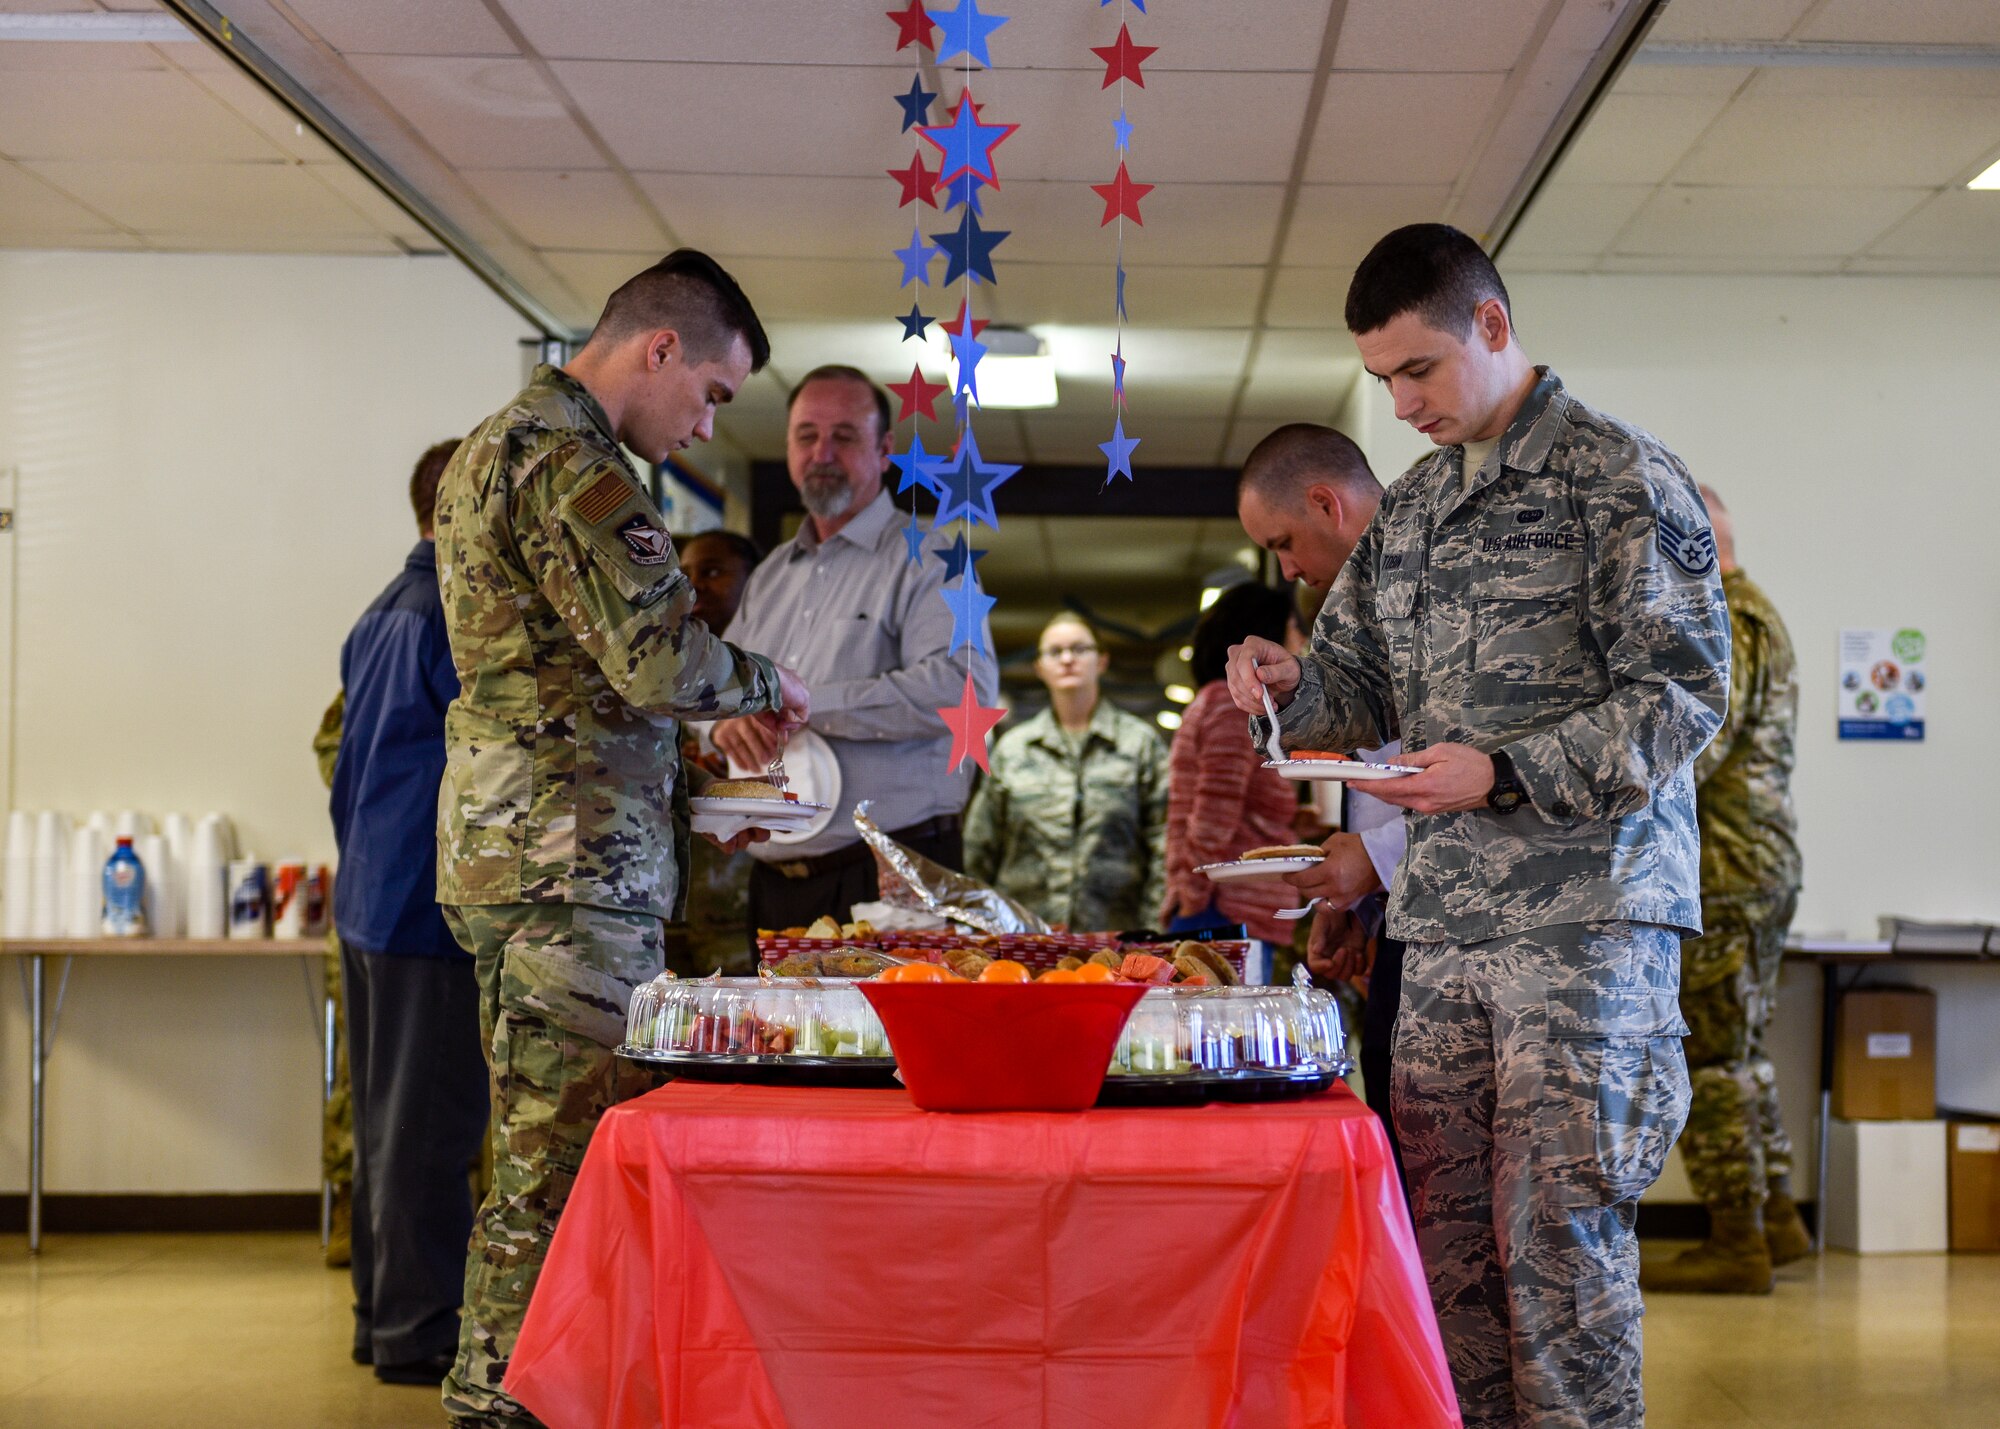 Participants in the Combined Federal Campaign breakfast event get food at Kirtland Air Force Base, N.M., Oct. 7, 2019. The CFC Kirtland AFB fundraising goal for 2019 is $126,000. (U.S. Air Force photo by Airman 1st Class Austin J. Prisbrey)